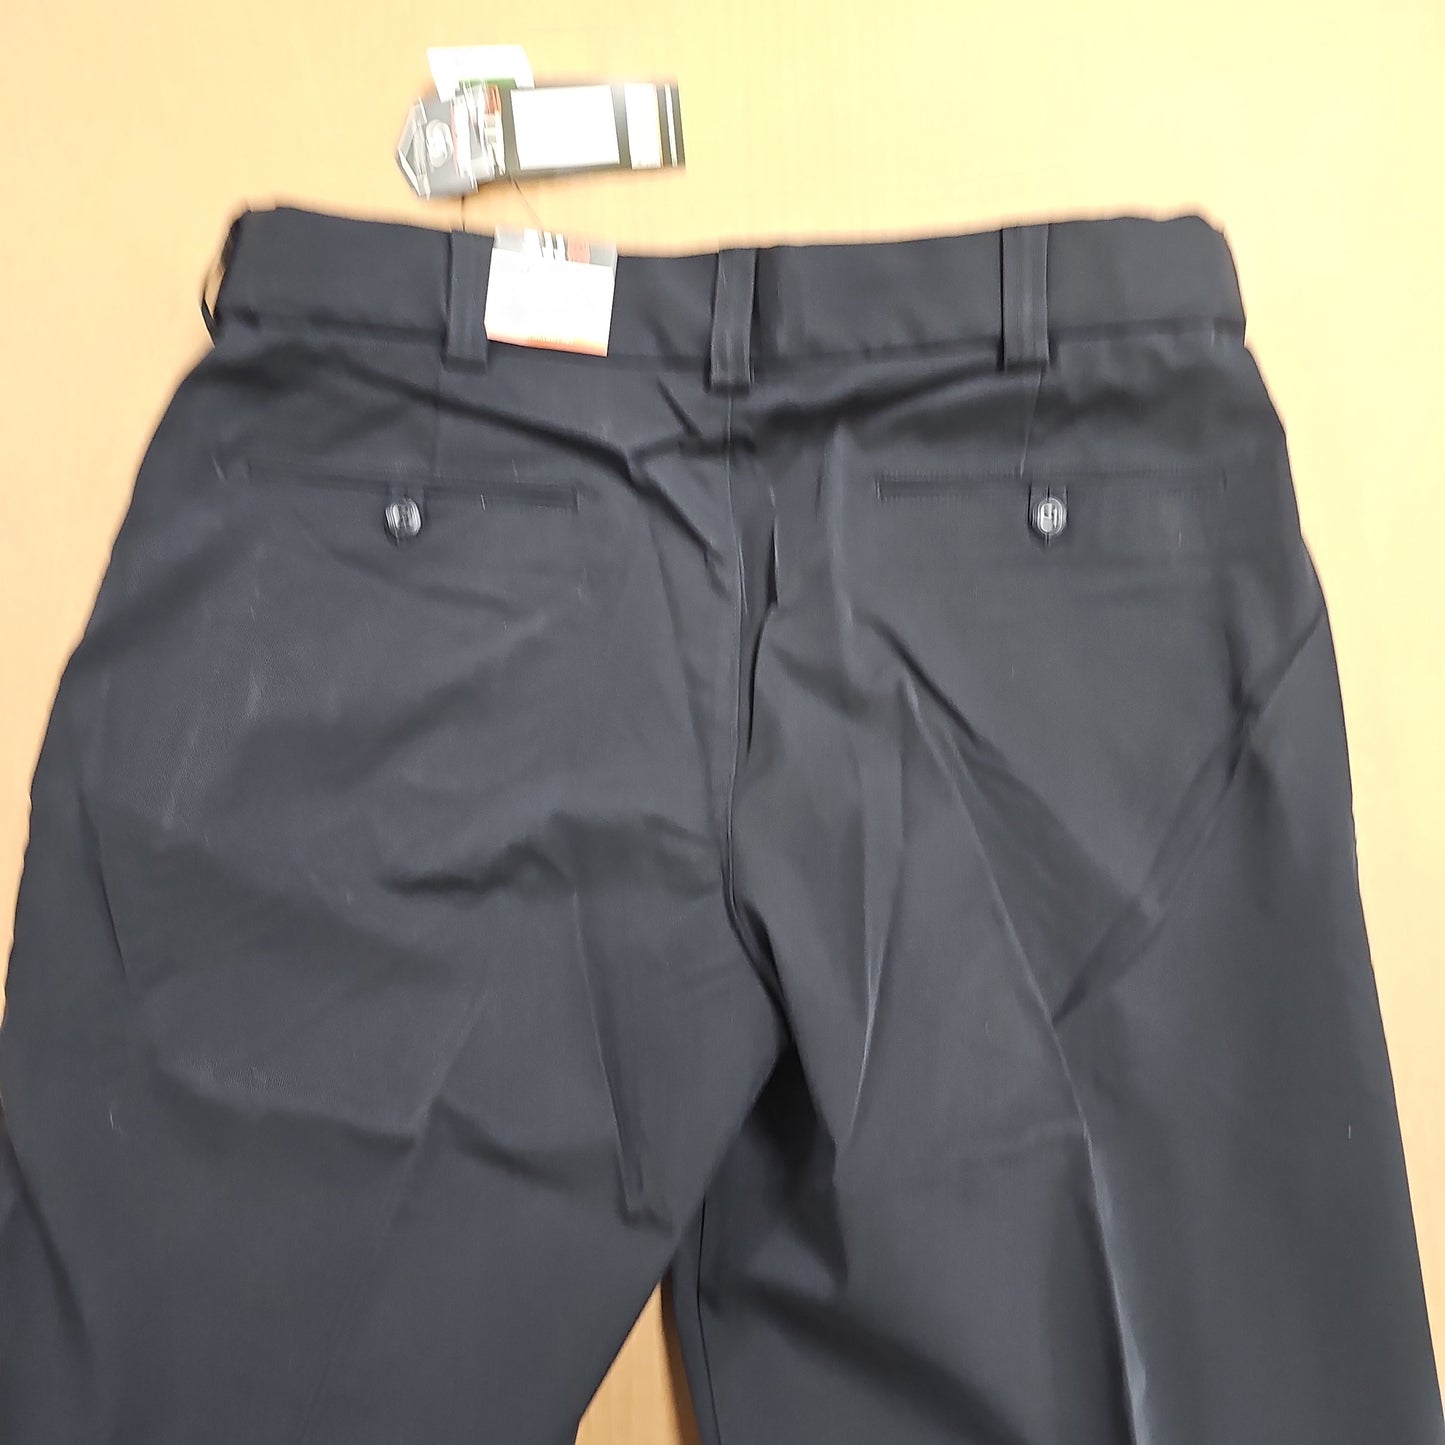 5.11 Tactical Pant: Twill, FT PW, CL-A Mid. Navy, 38 74492-750-38